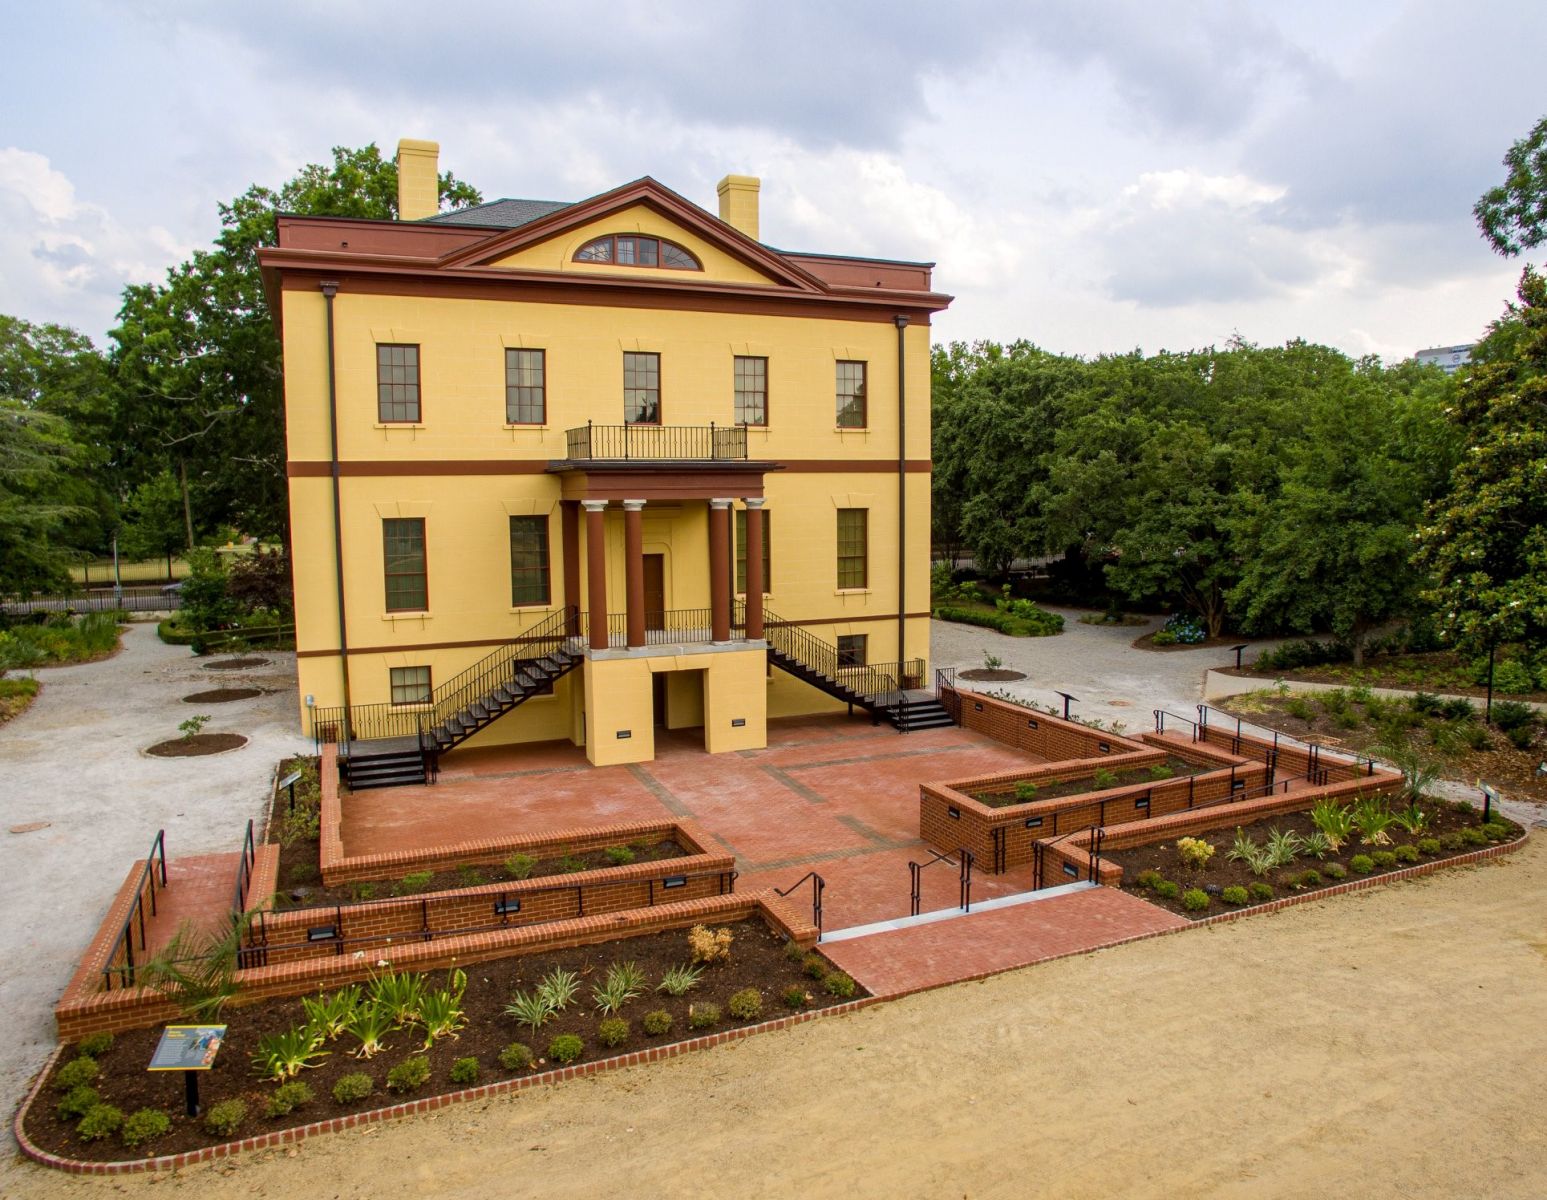 The third phase of renovations to the Hampton-Preston Mansion and Gardens excavated an original basement for new event space. (Photo/Historic Columbia)